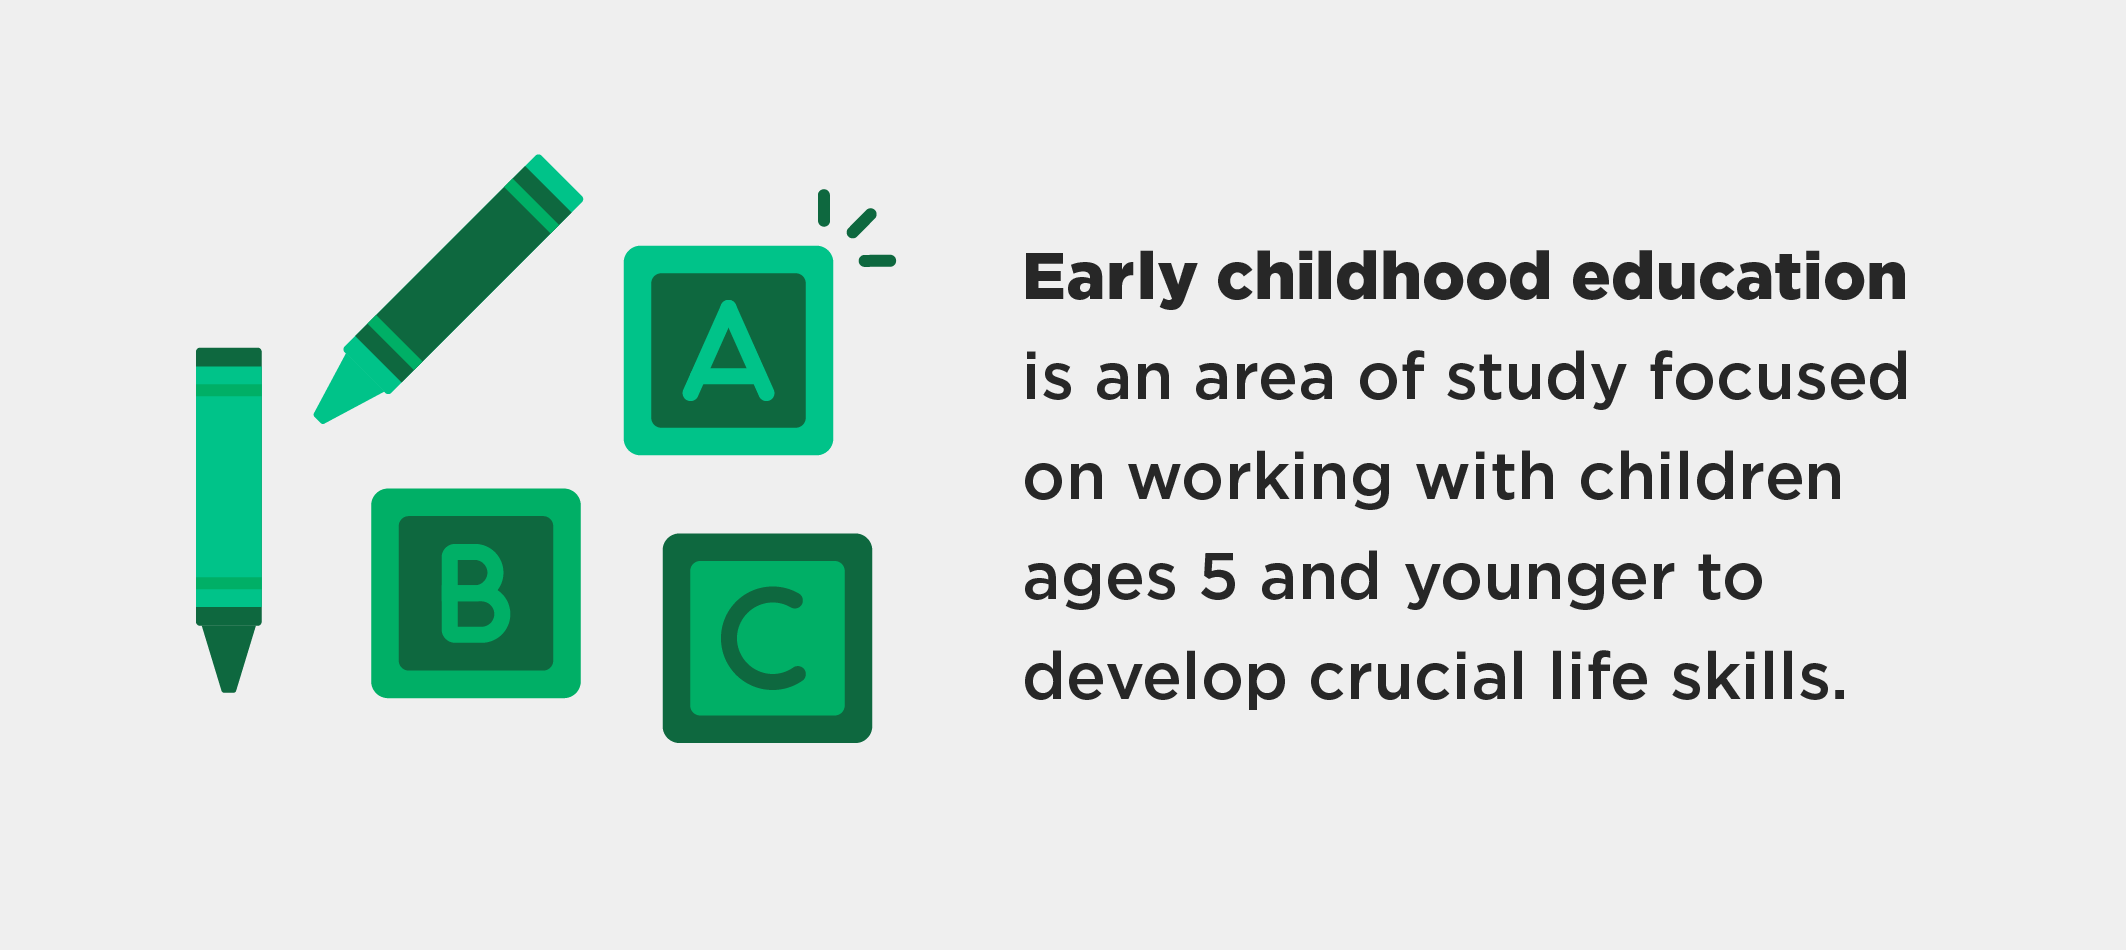 Early childhood education is an area of study focused on working with children ages 5 and younger to develop crucial life skills.